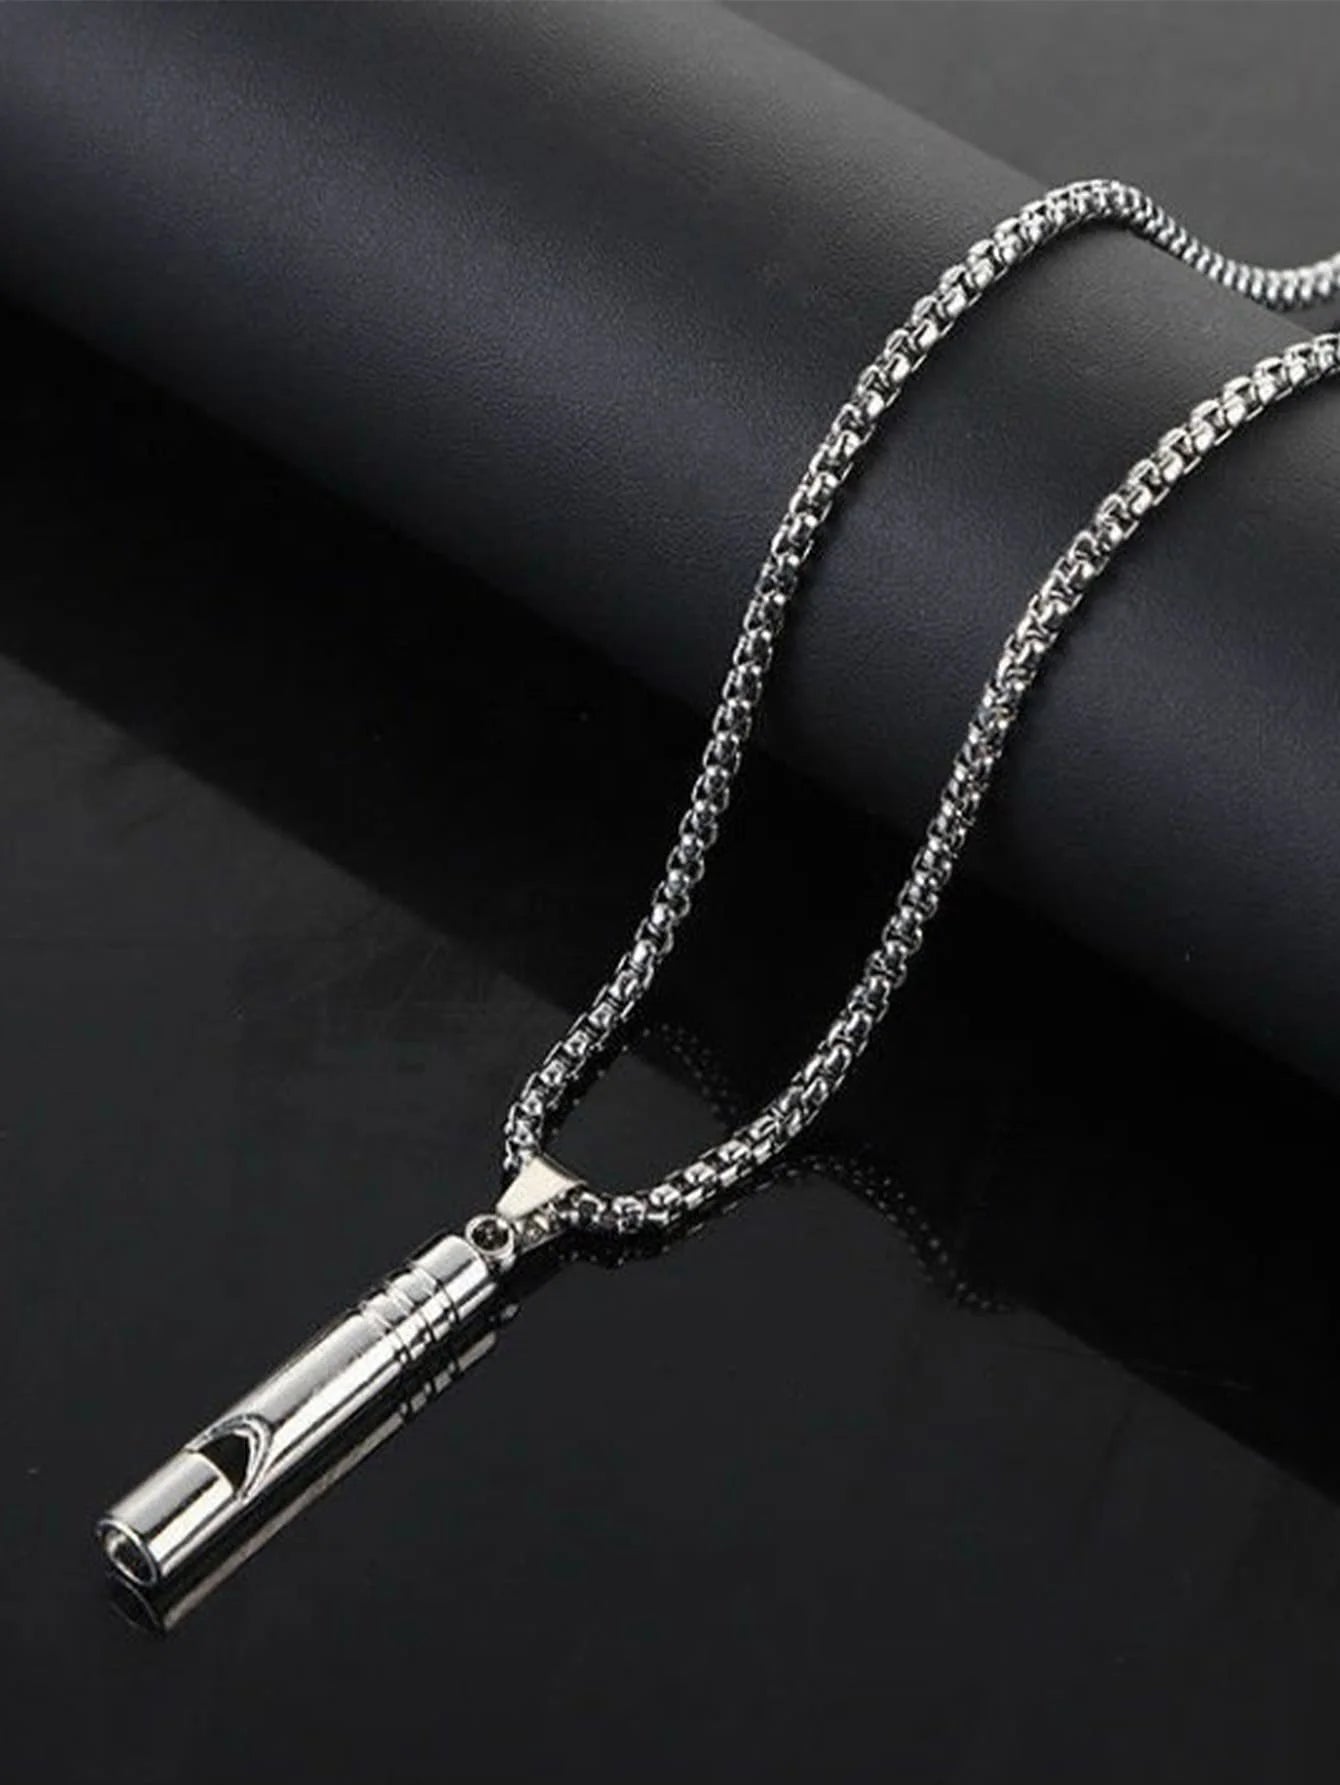 1pcs Breathing Necklace Stainless Steel Anapana Breathing Necklace Increase Attention Whistle Necklace Anxiety Relief for Kids A